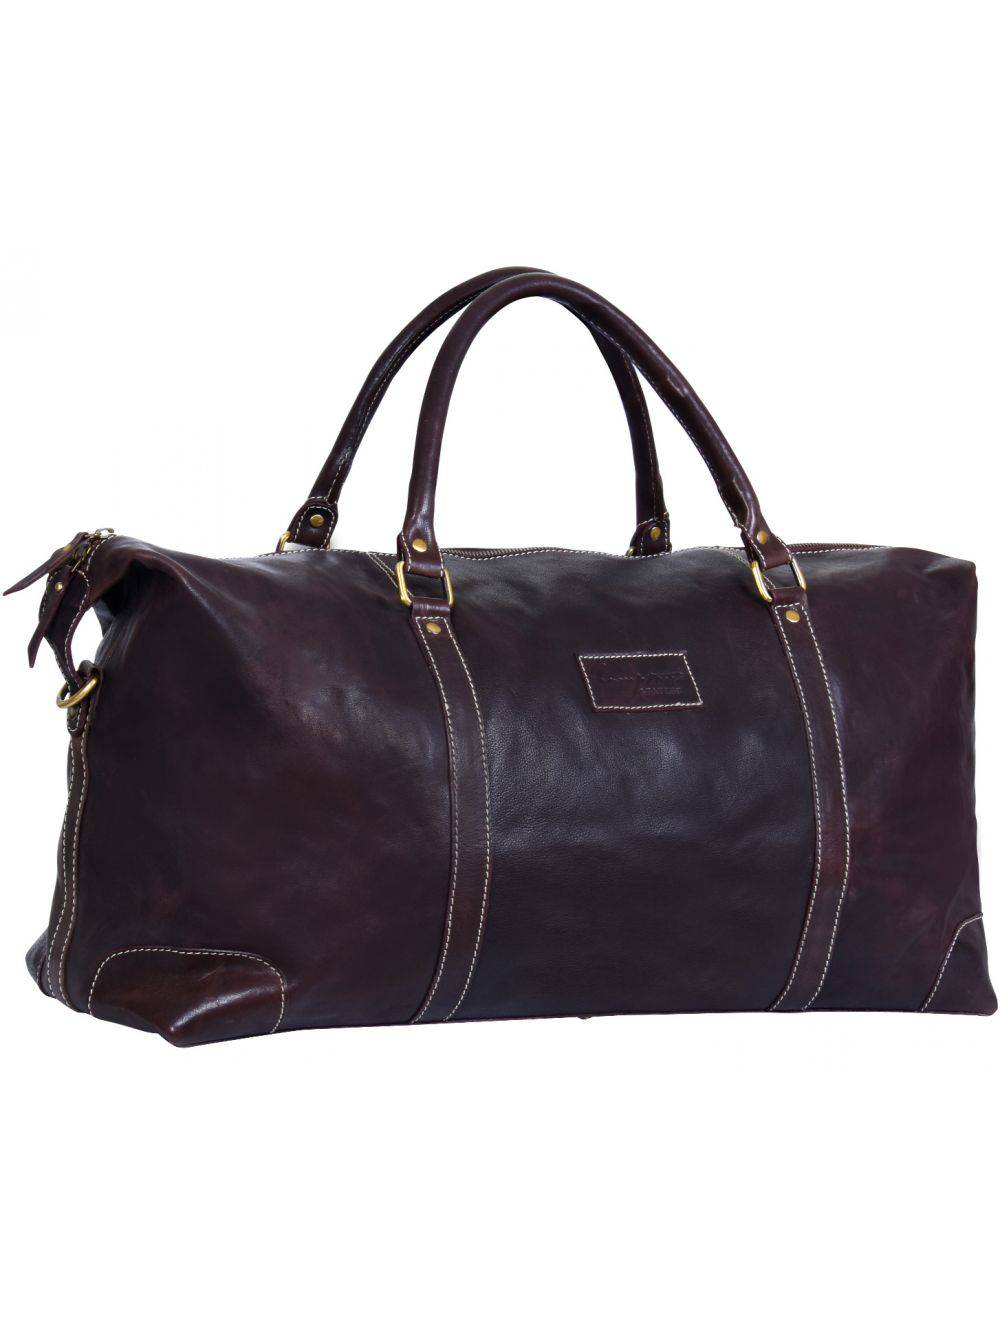 Brown Leather Duffle Travel Gym Weekend Carry On Bag for sale - Woodcock and Cavendish